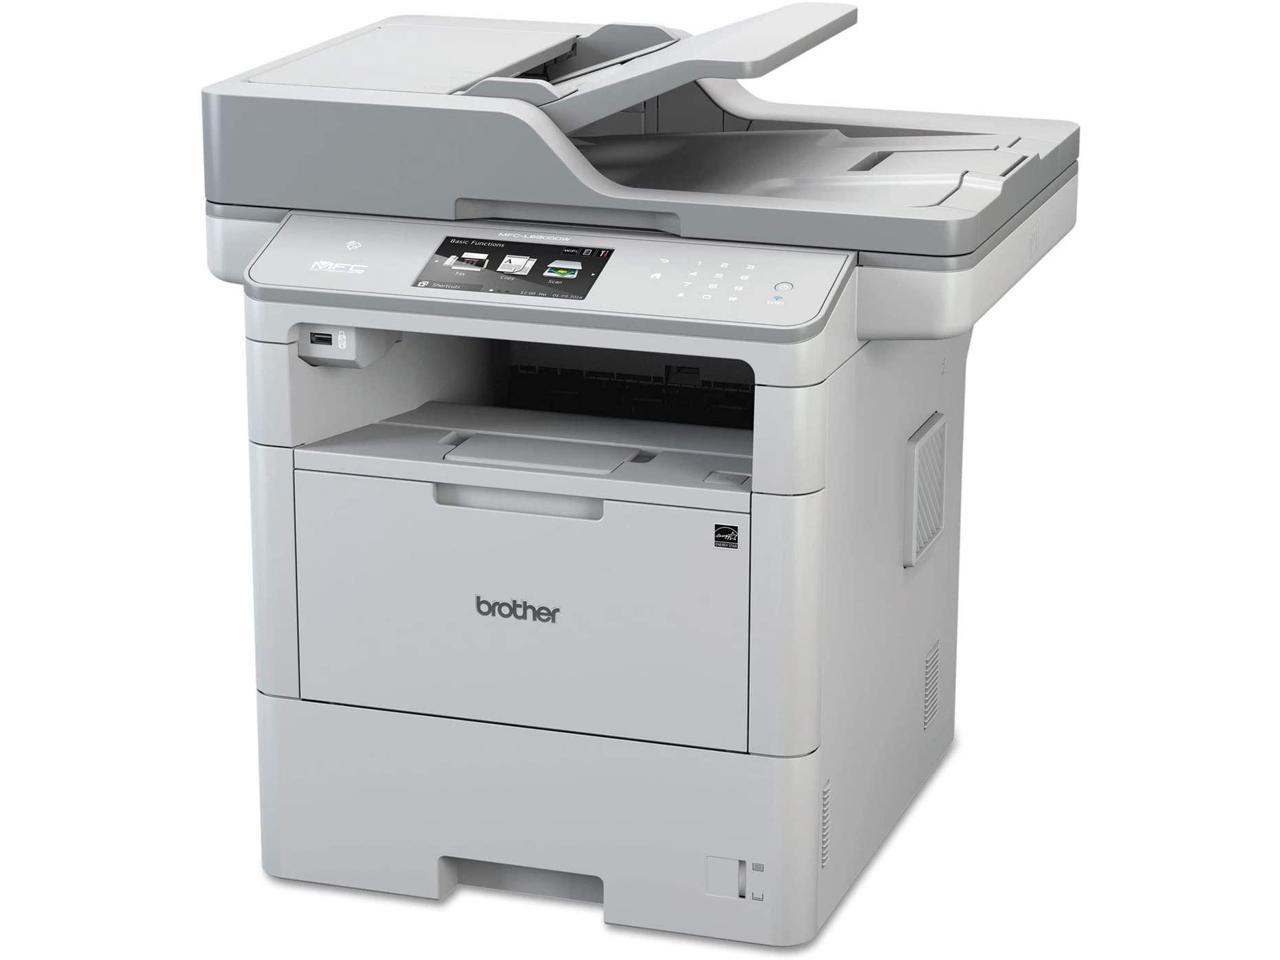 Brother Mfcl6900dw Monochrome Business Laser All-in-One Printer for Mid-Size Workgroups W/Higher Print Volumes